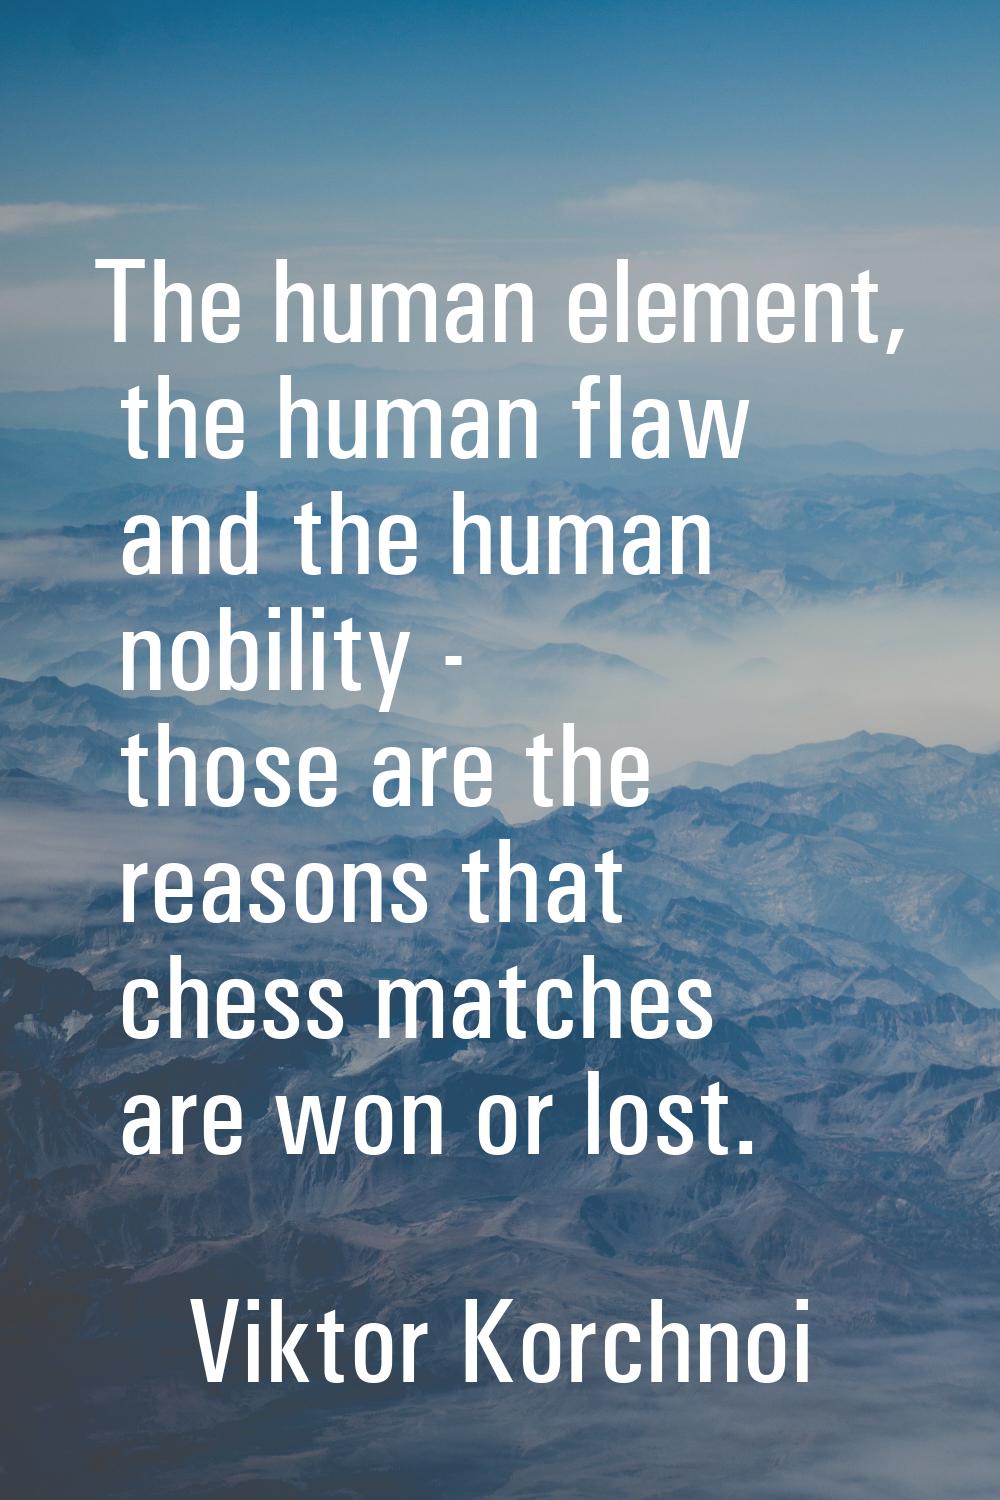 The human element, the human flaw and the human nobility - those are the reasons that chess matches